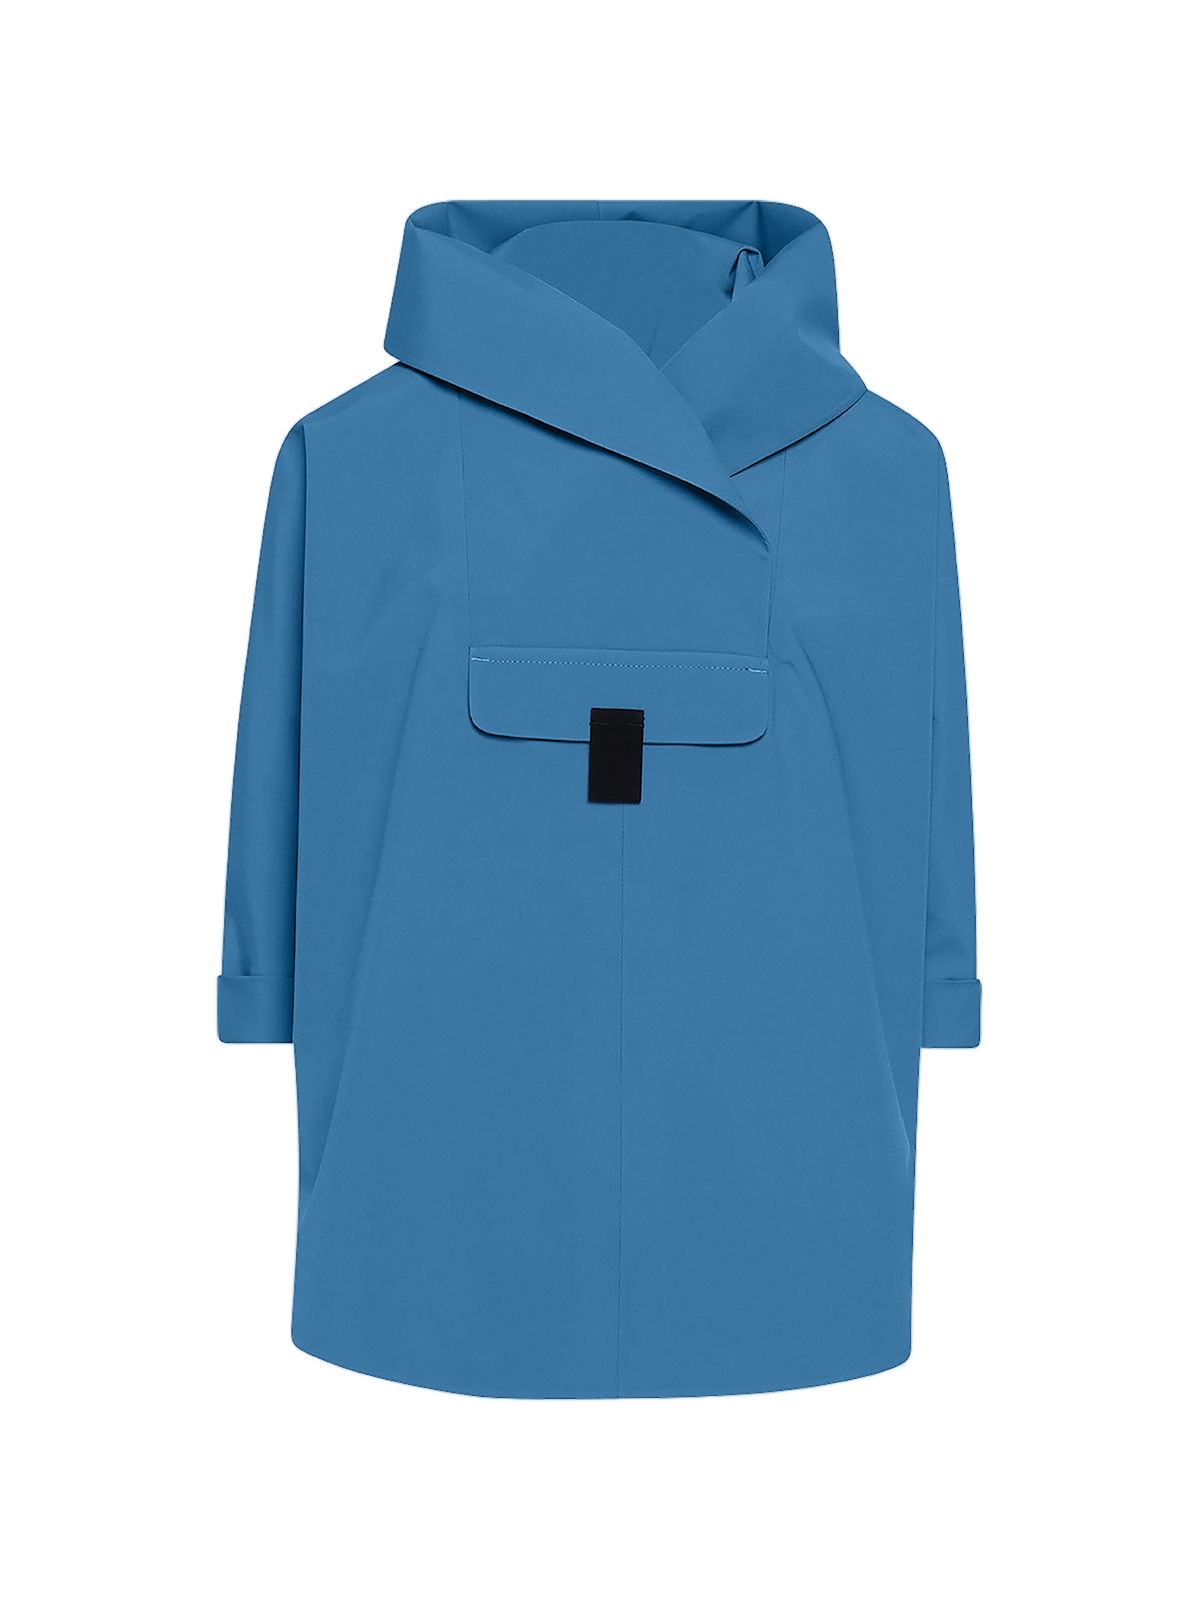 Bergen mini poncho in the color Coronet Blue from Blæst